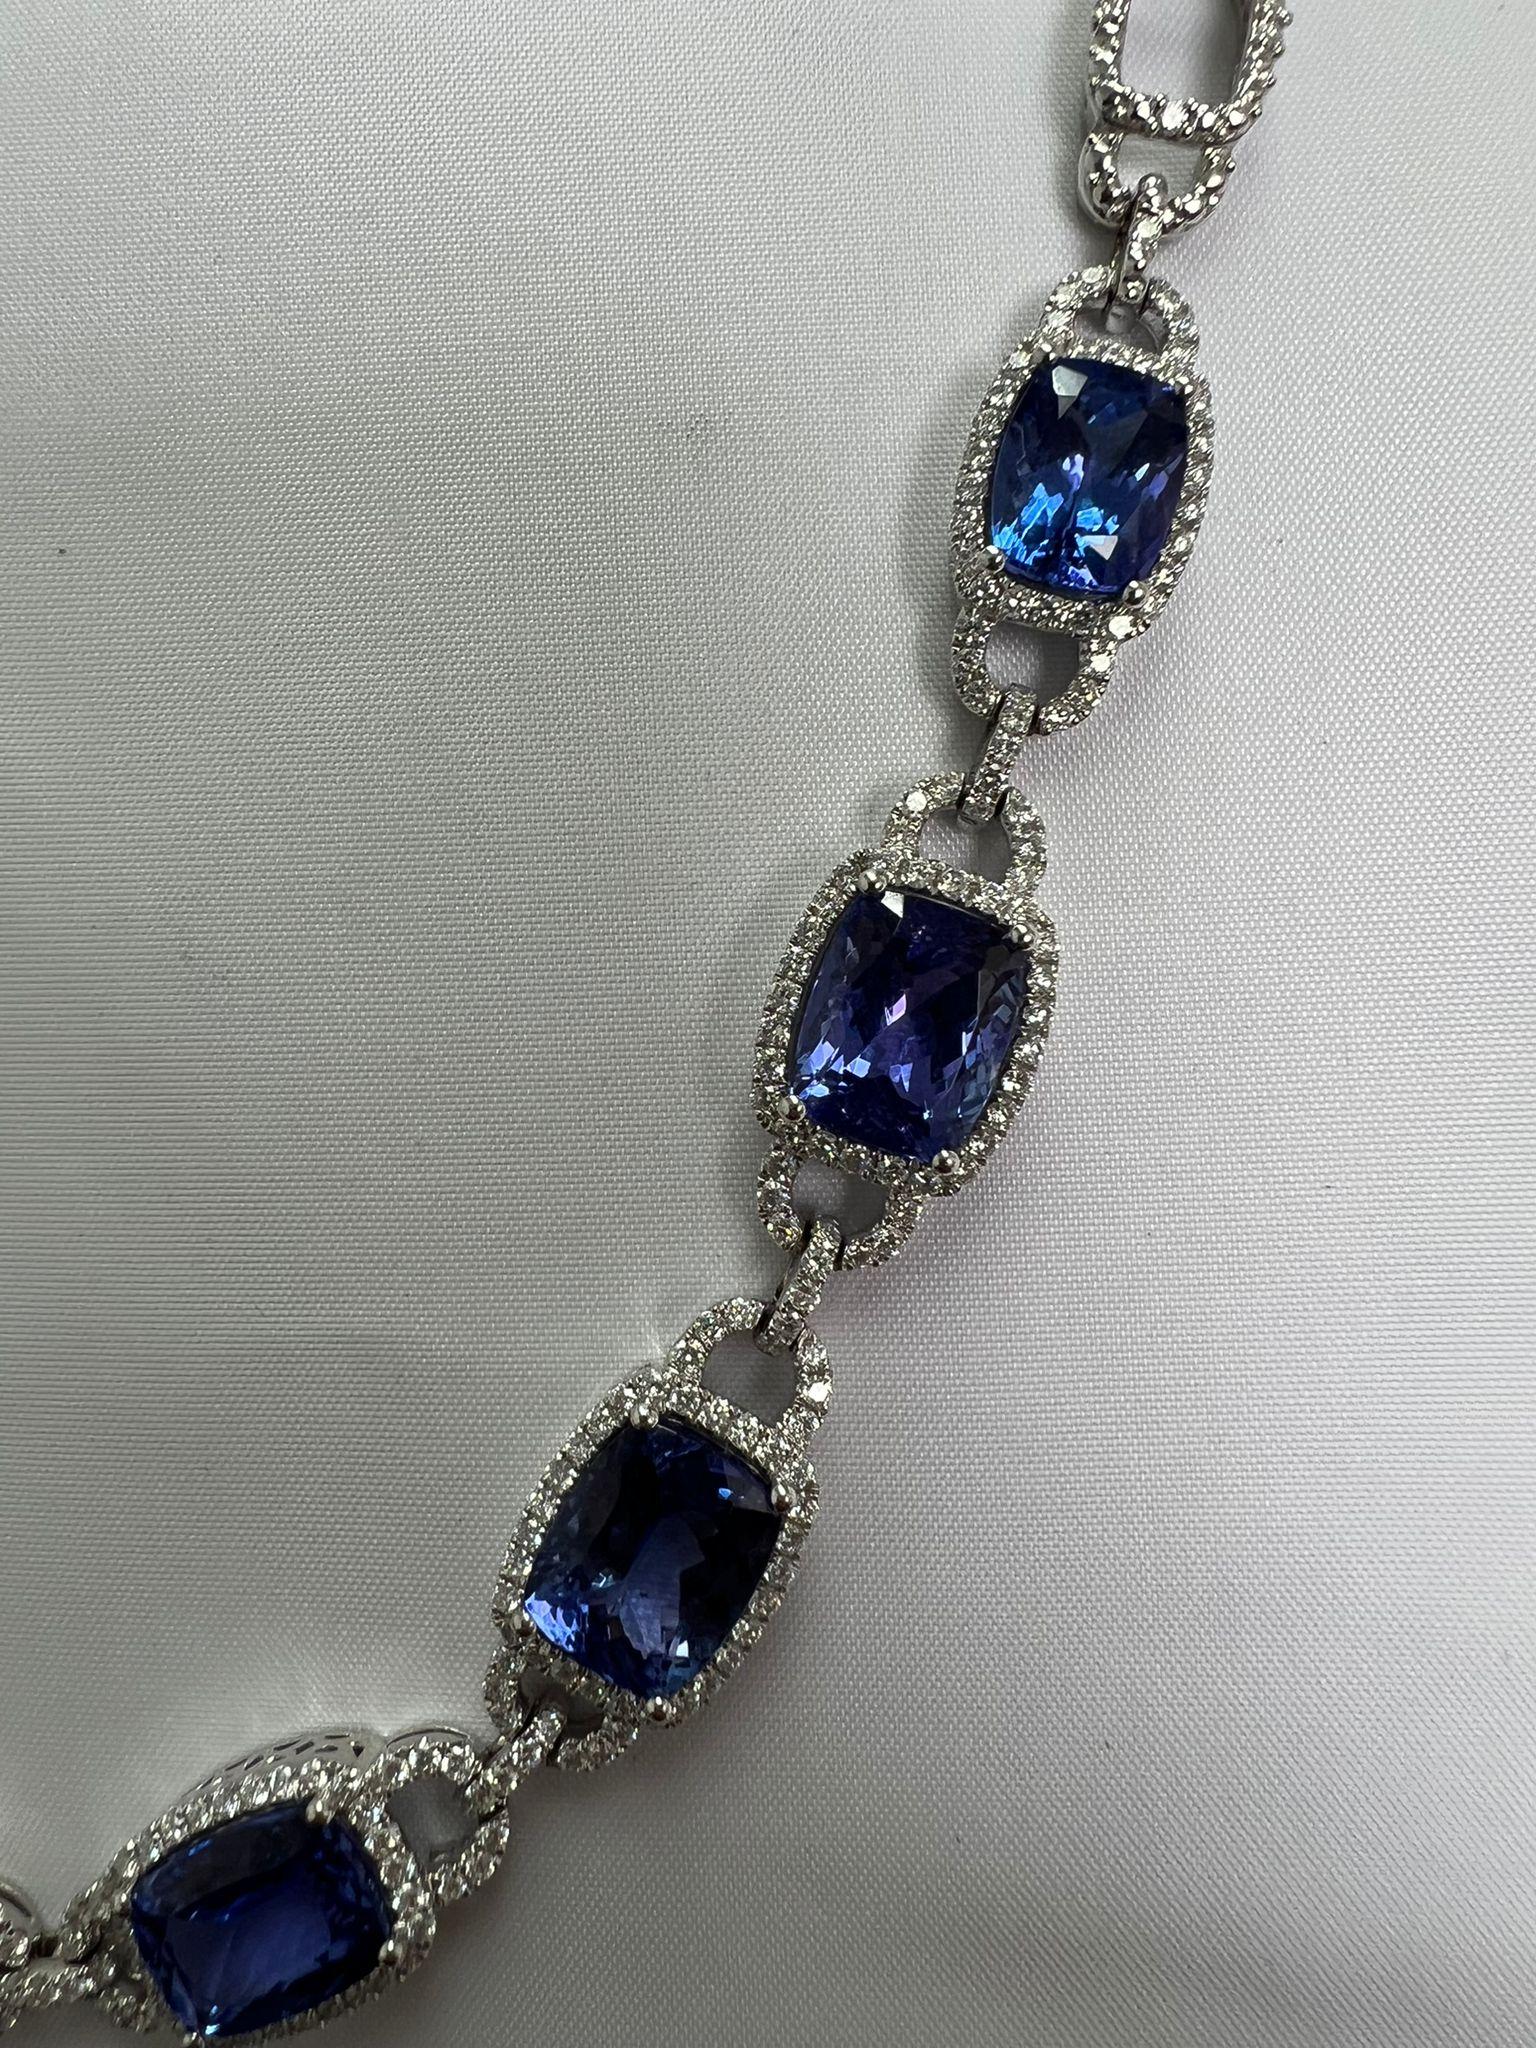 Exquisite 14 Karat White Gold Cushion Tanzanite Necklace - Vivid AAA Quality For Sale 8